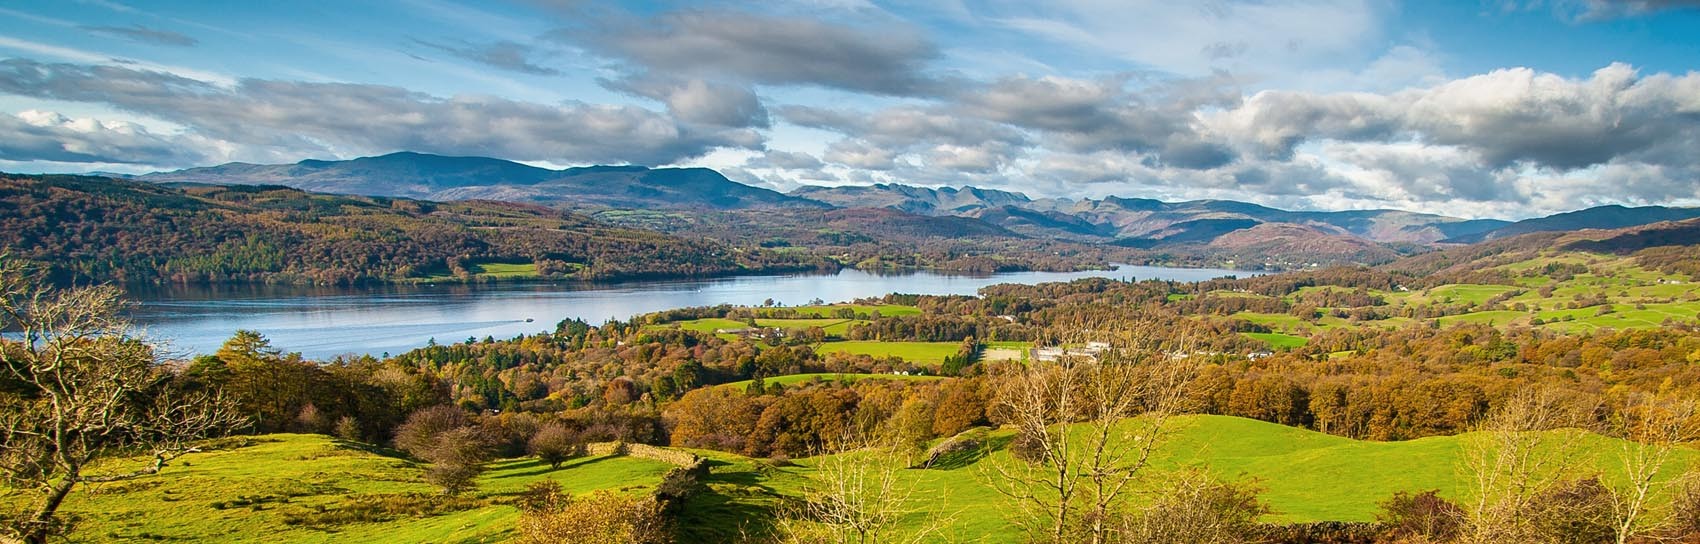 The view from Orrest Head of Lake Windermere and the Central Fells beyond. Photograph by TOMASZ WOZNIAK